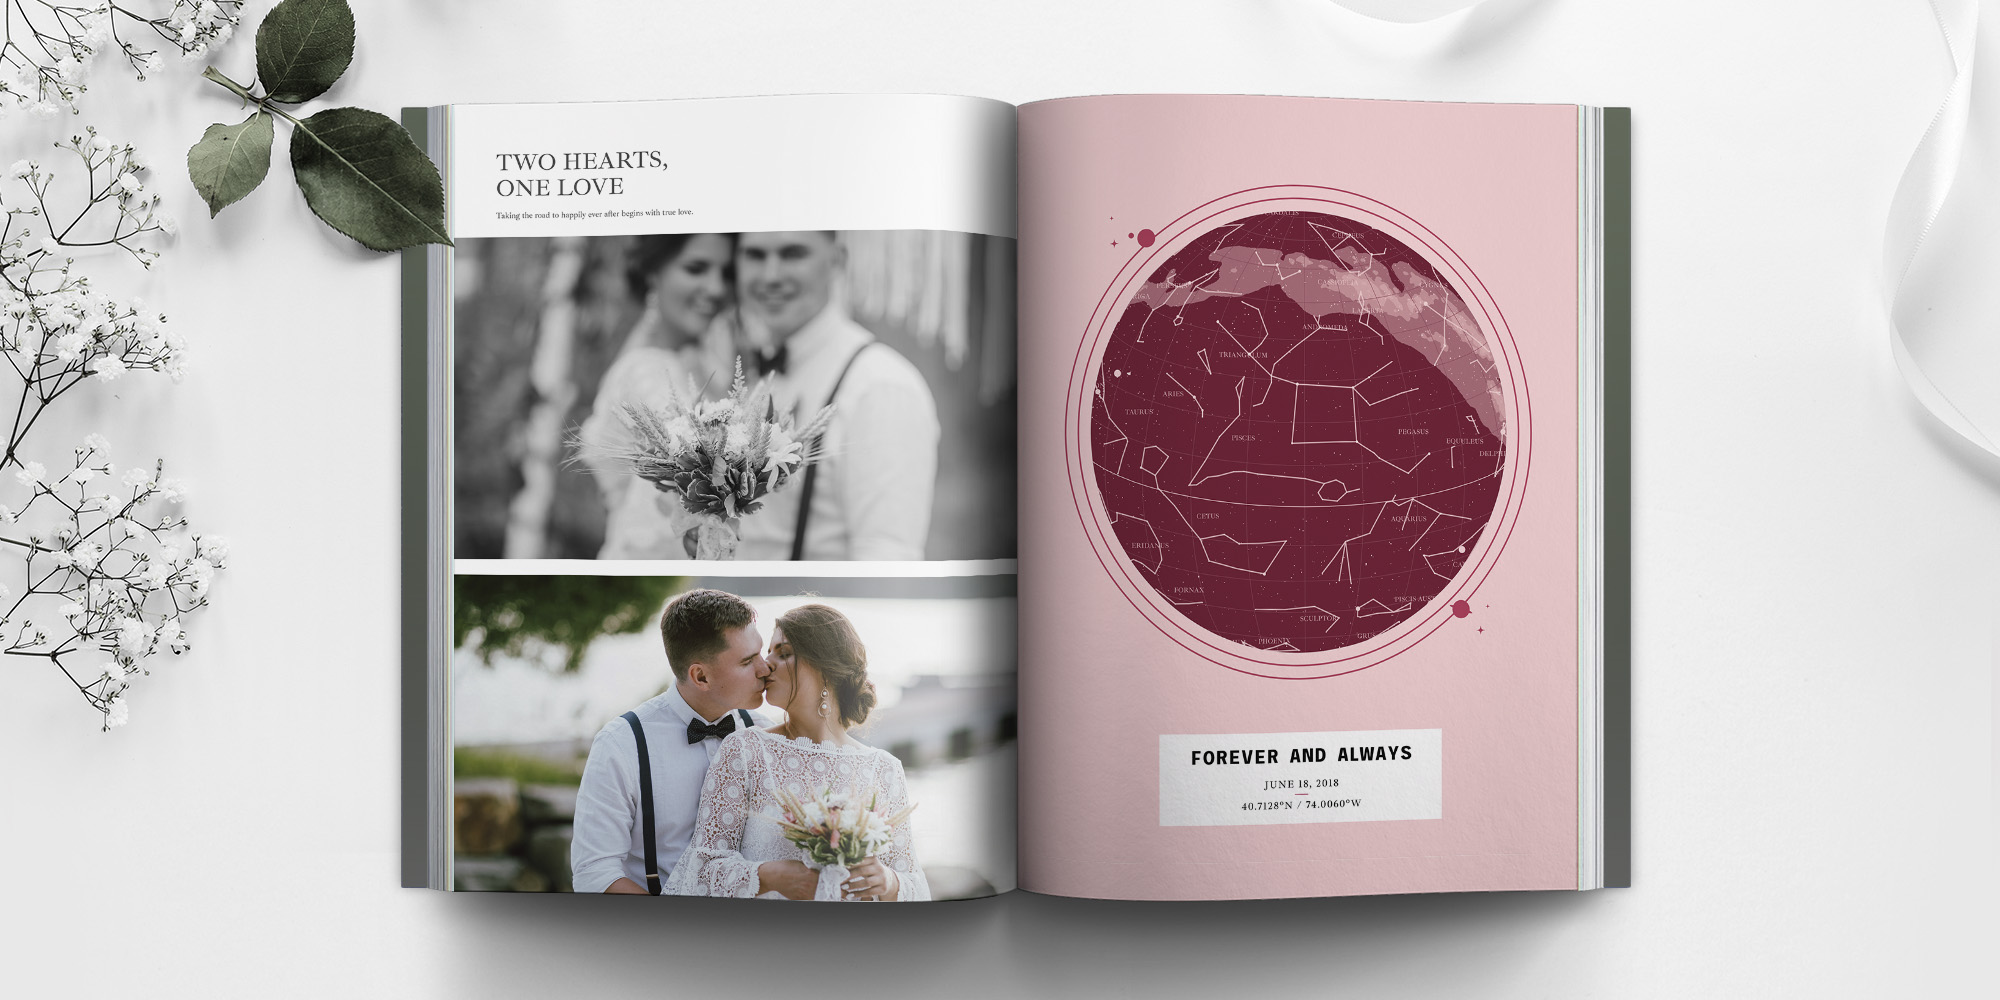 Wedding Photo Book Ideas – A Picture-Perfect “How To” Guide